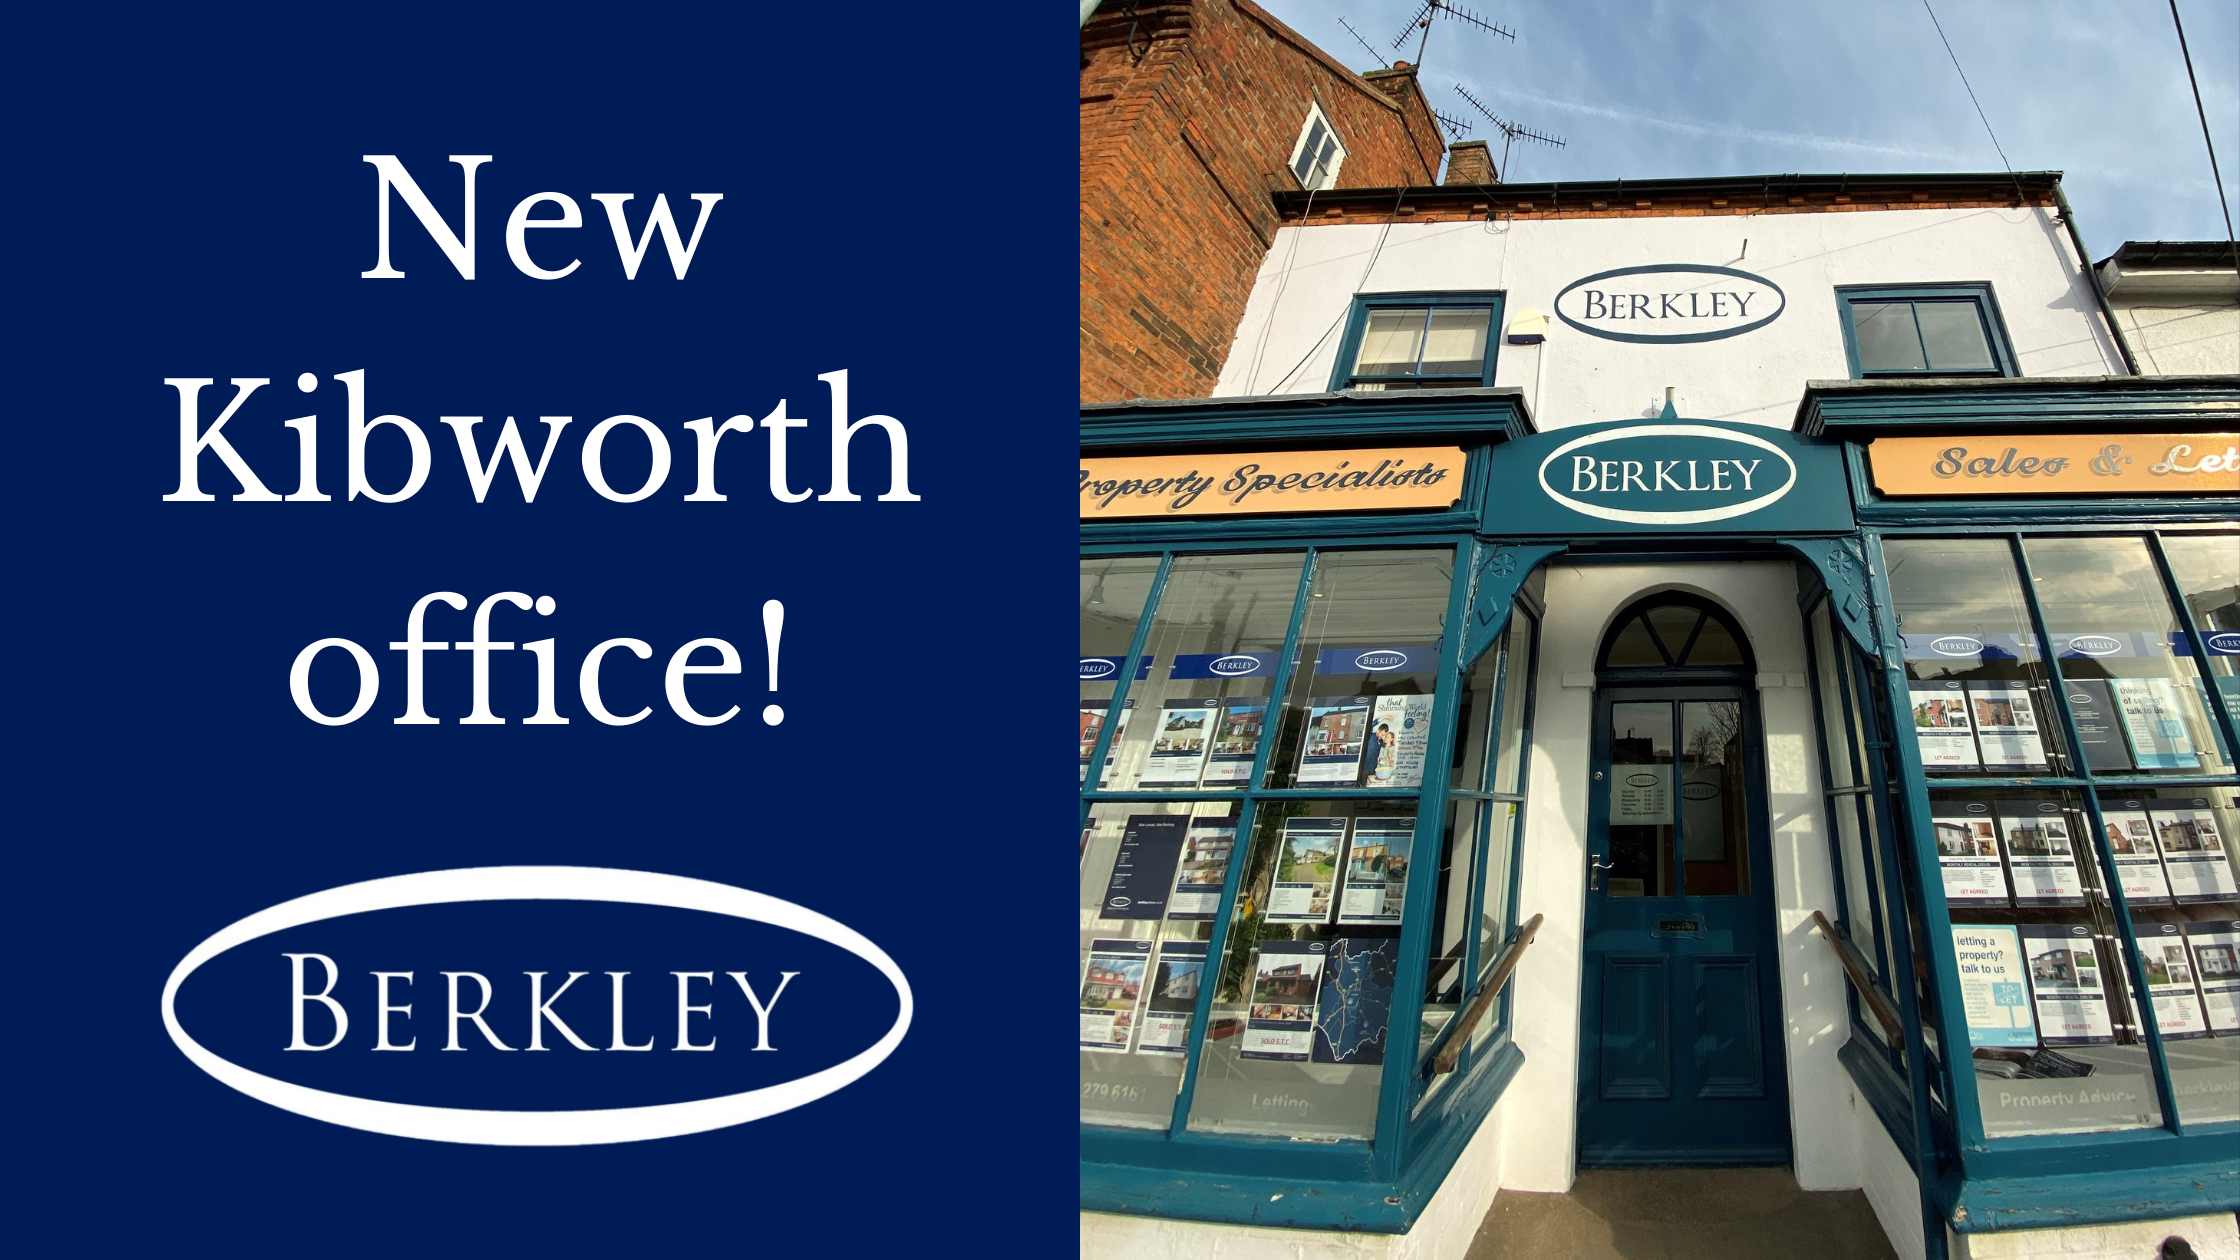 Our Berkley Kibworth Office is moving